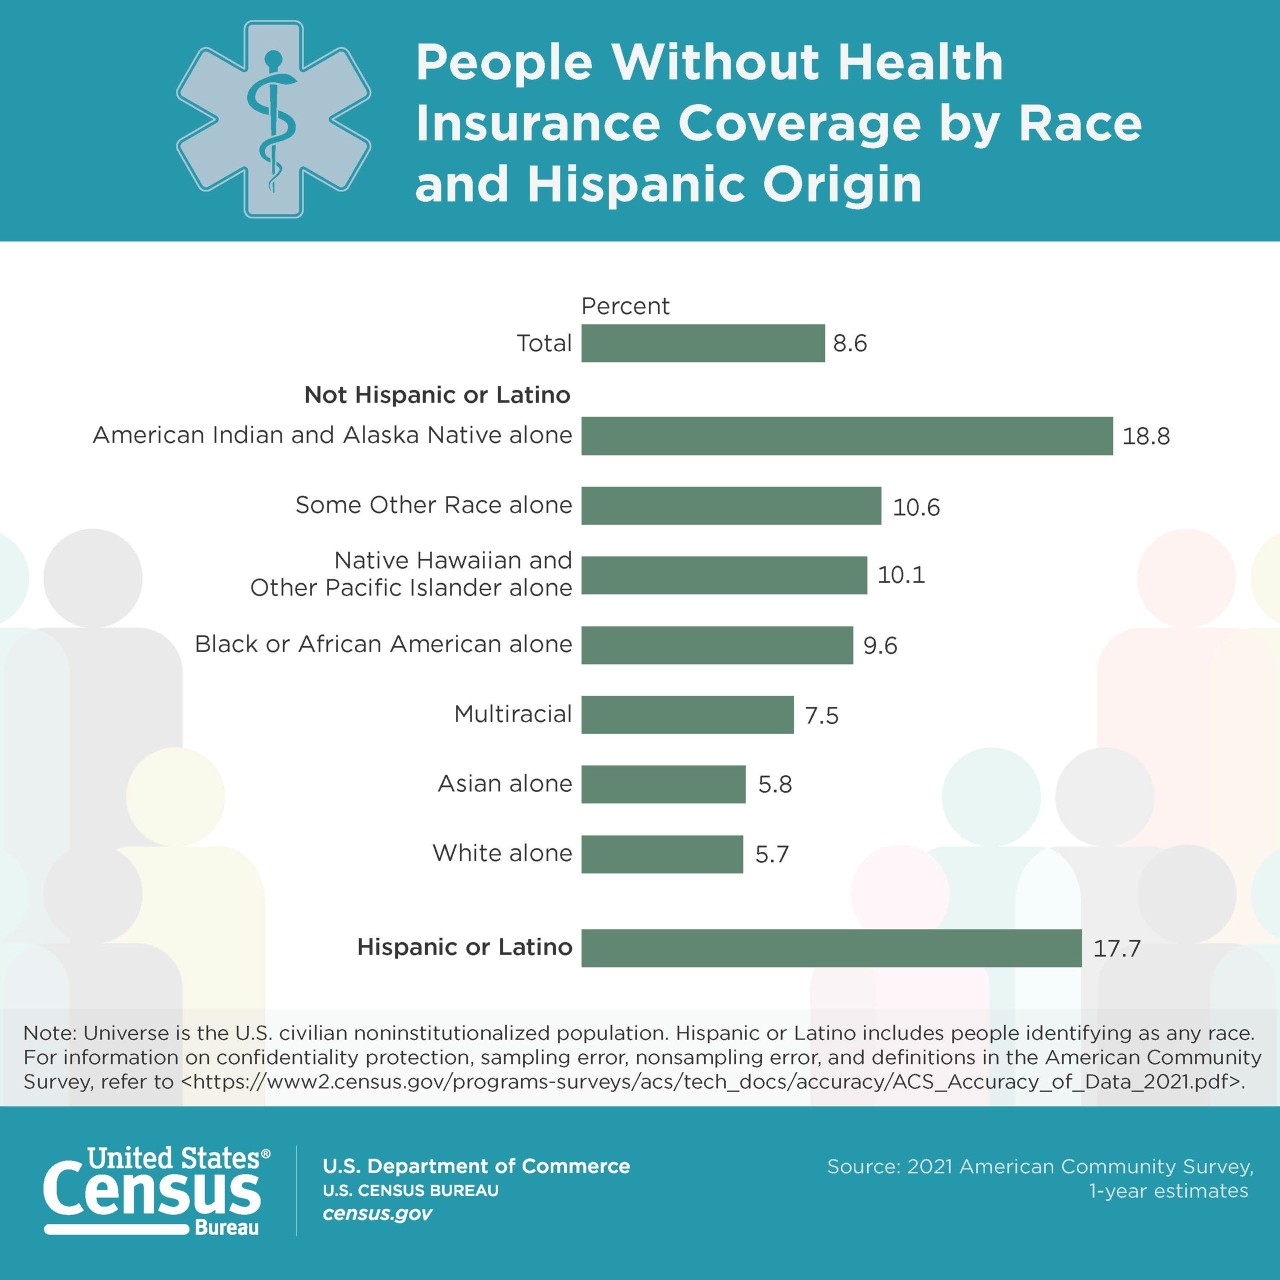 People Without Health Insurance Coverage by Race and Hispanic Origin